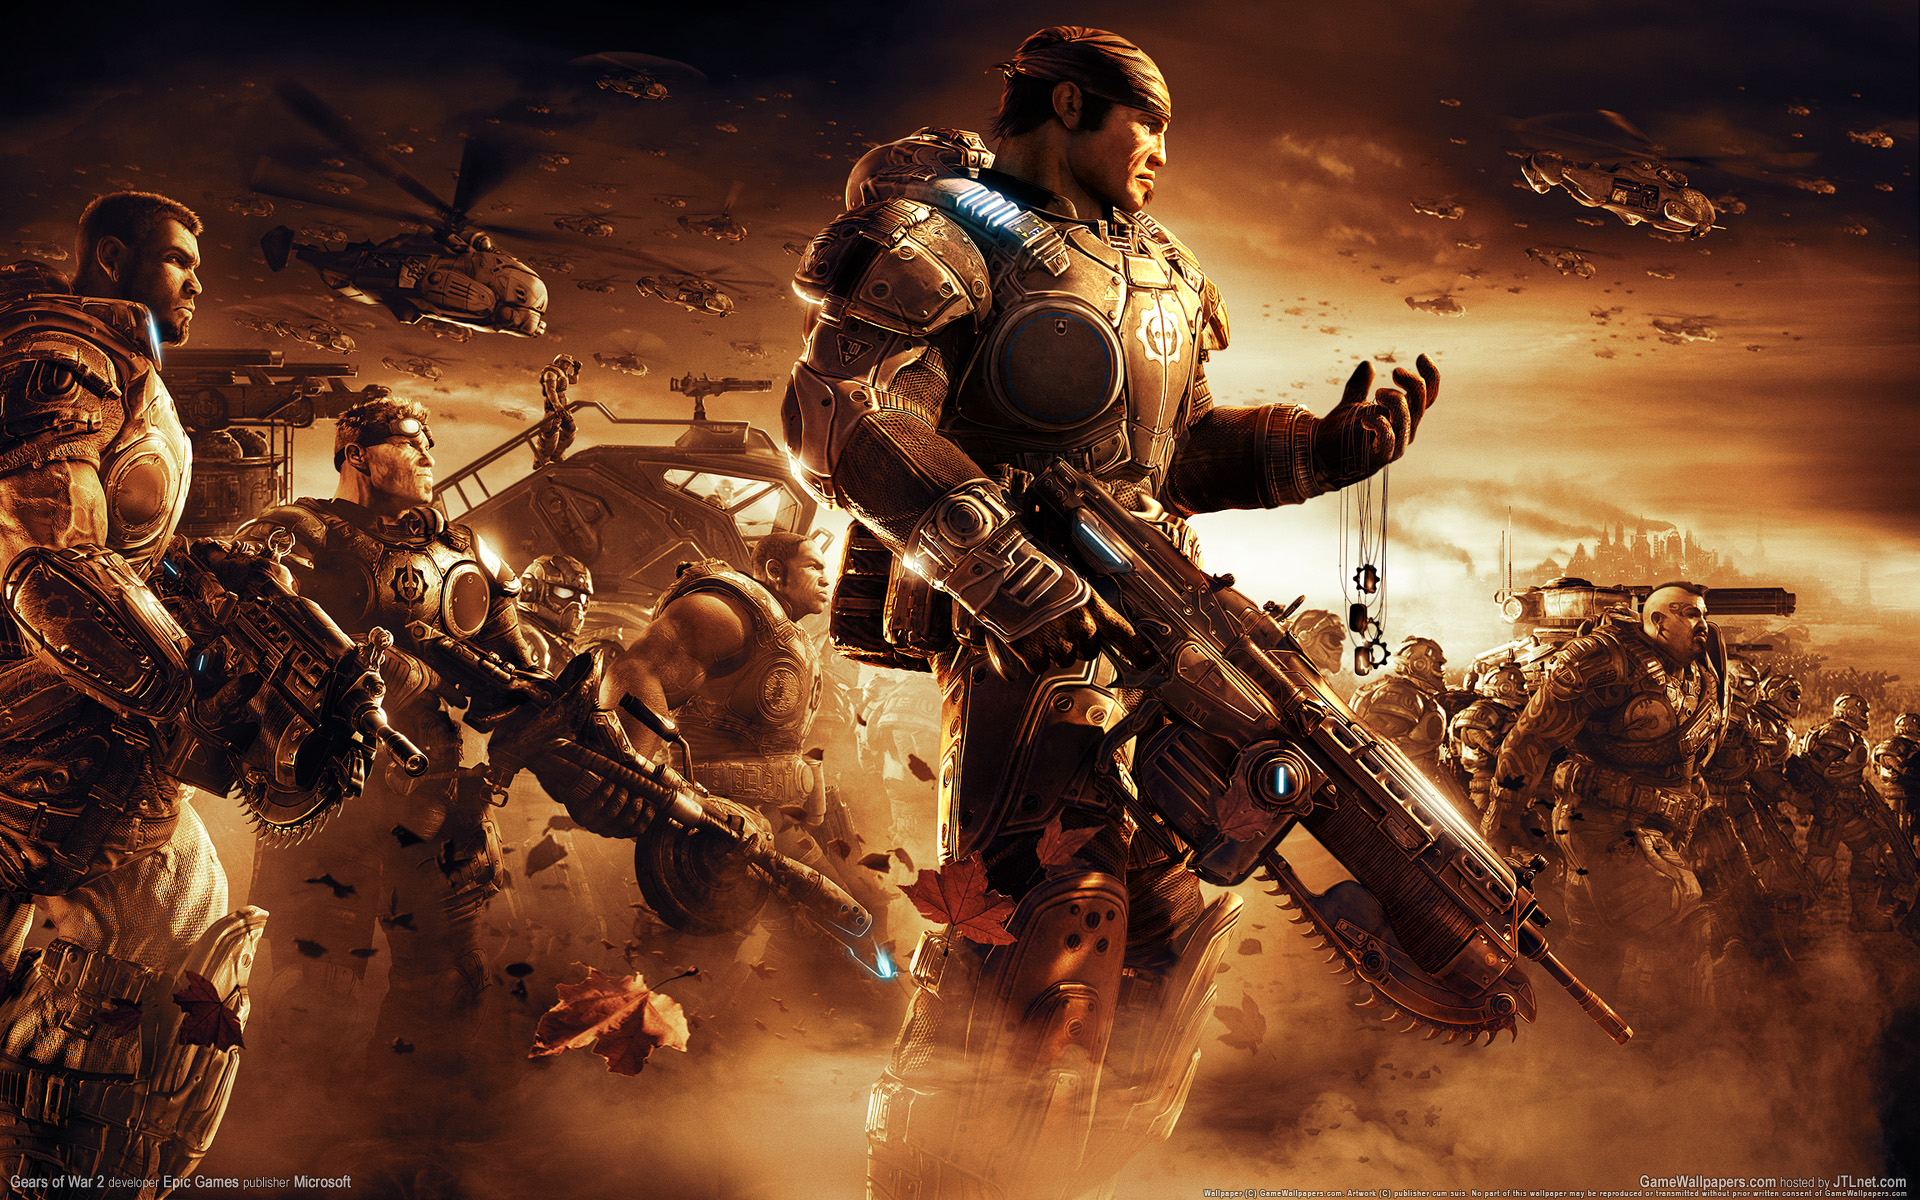 22 Awesome 3D Game Wallpapers Gears of War   Downloads   TechMynd